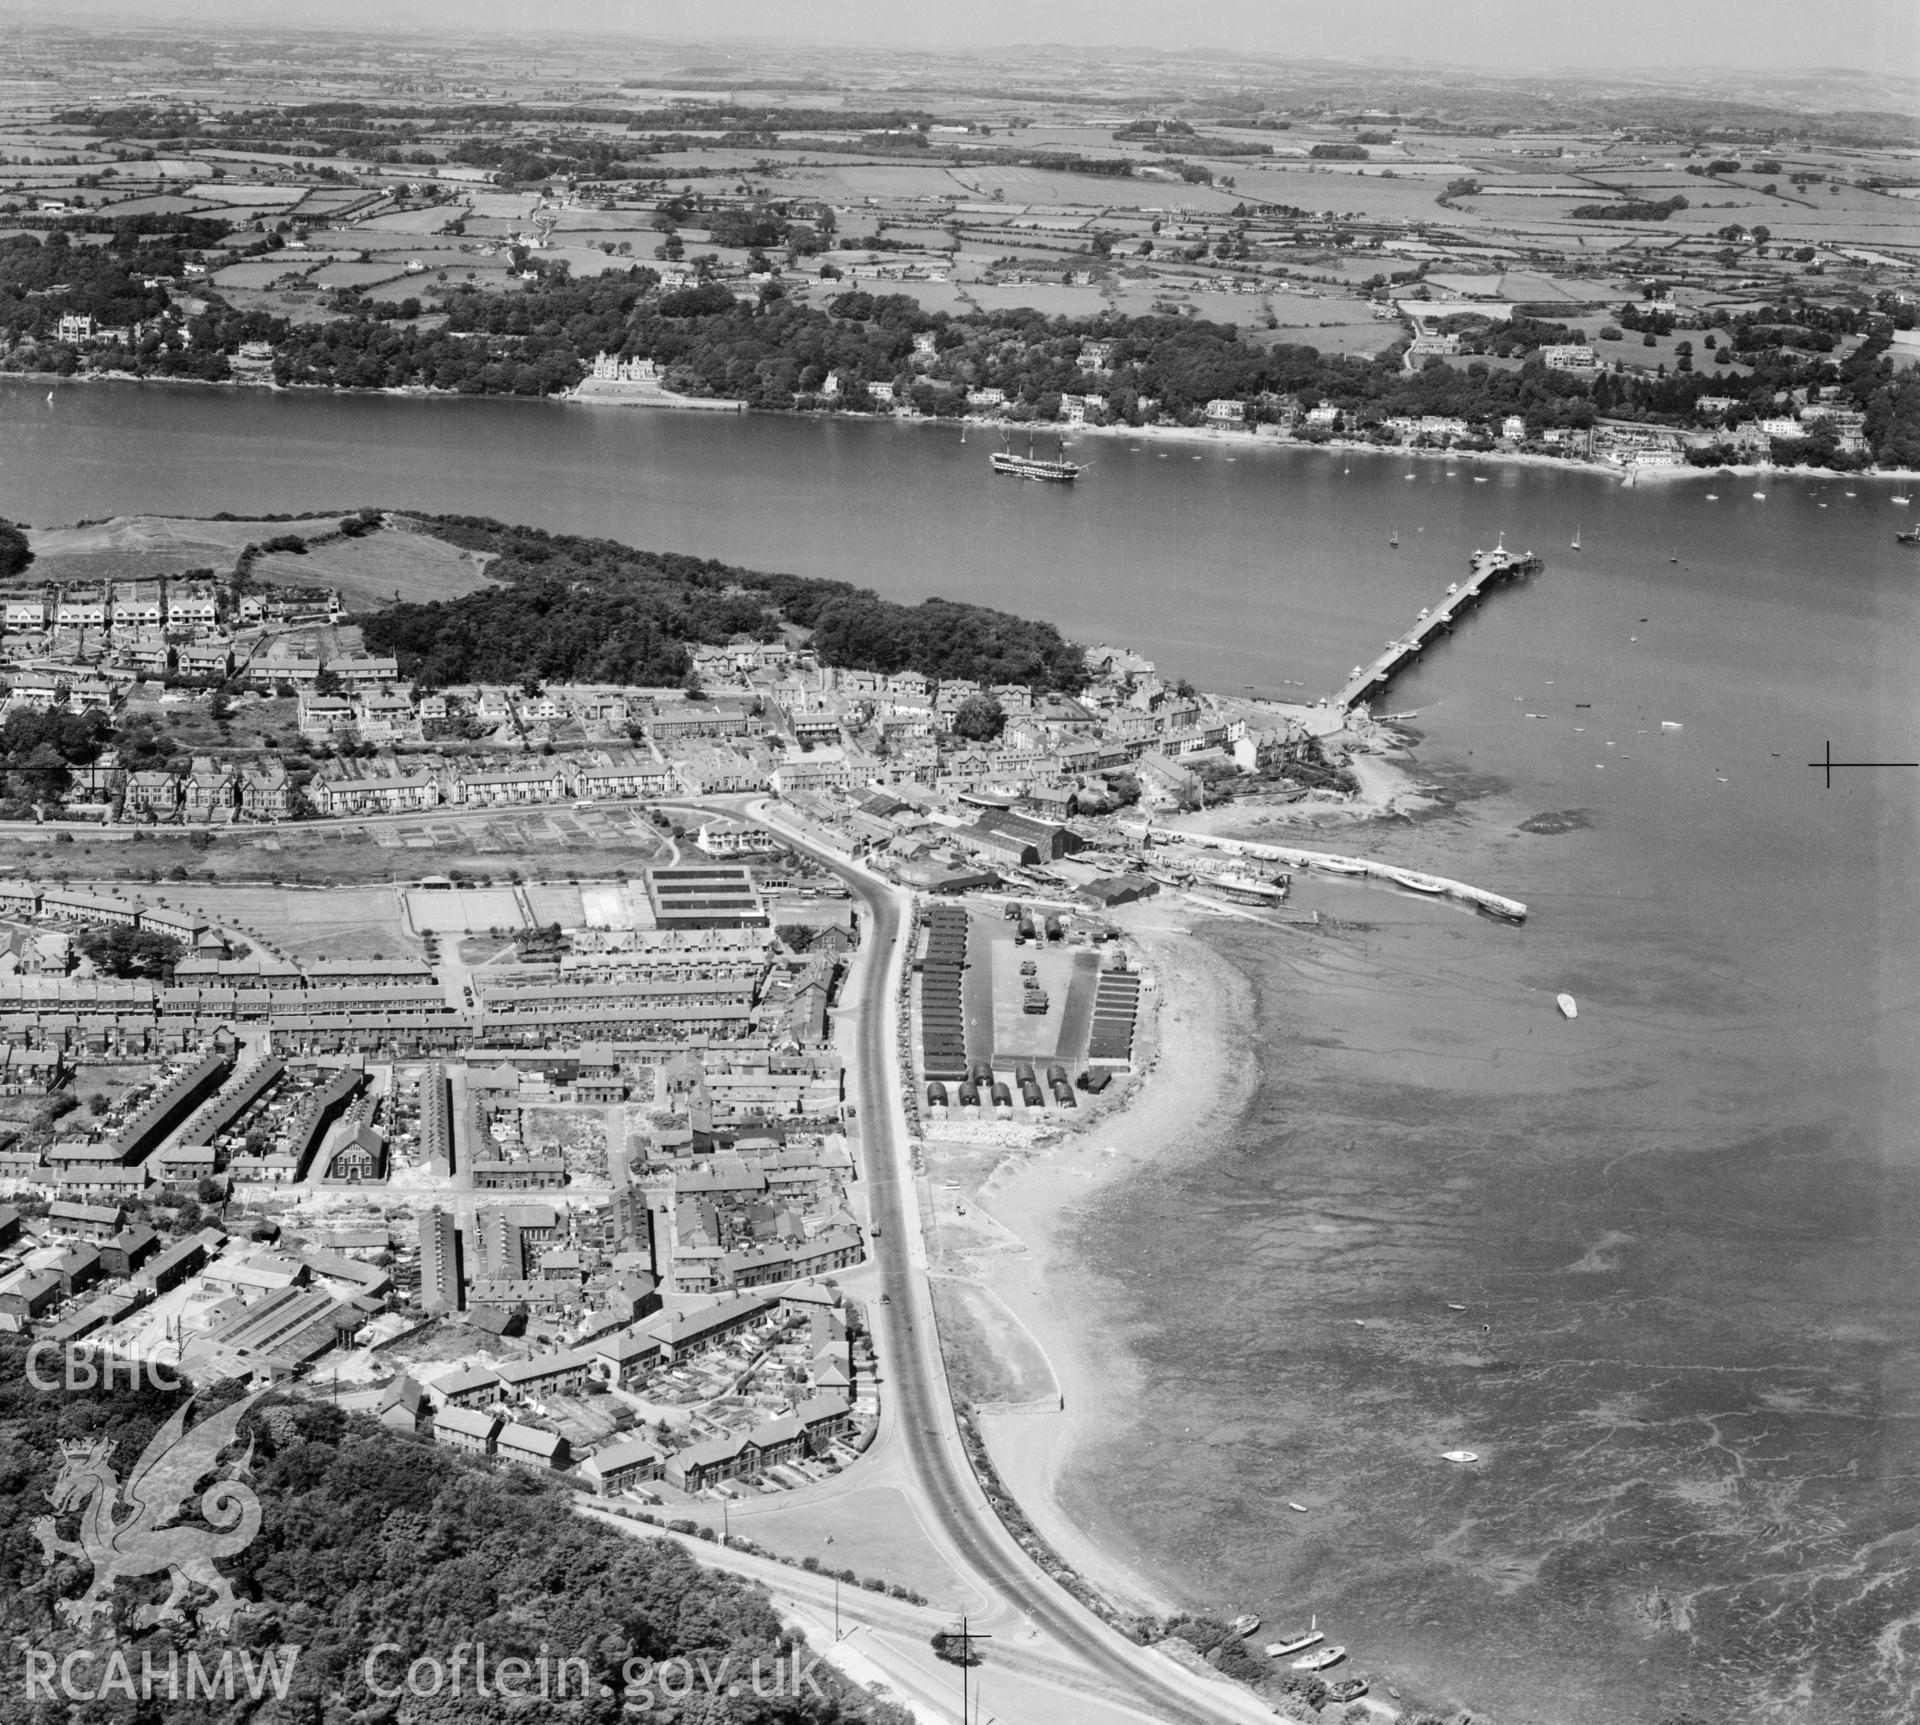 View of Bangor showing military camp on site of St George's Field Playing fields